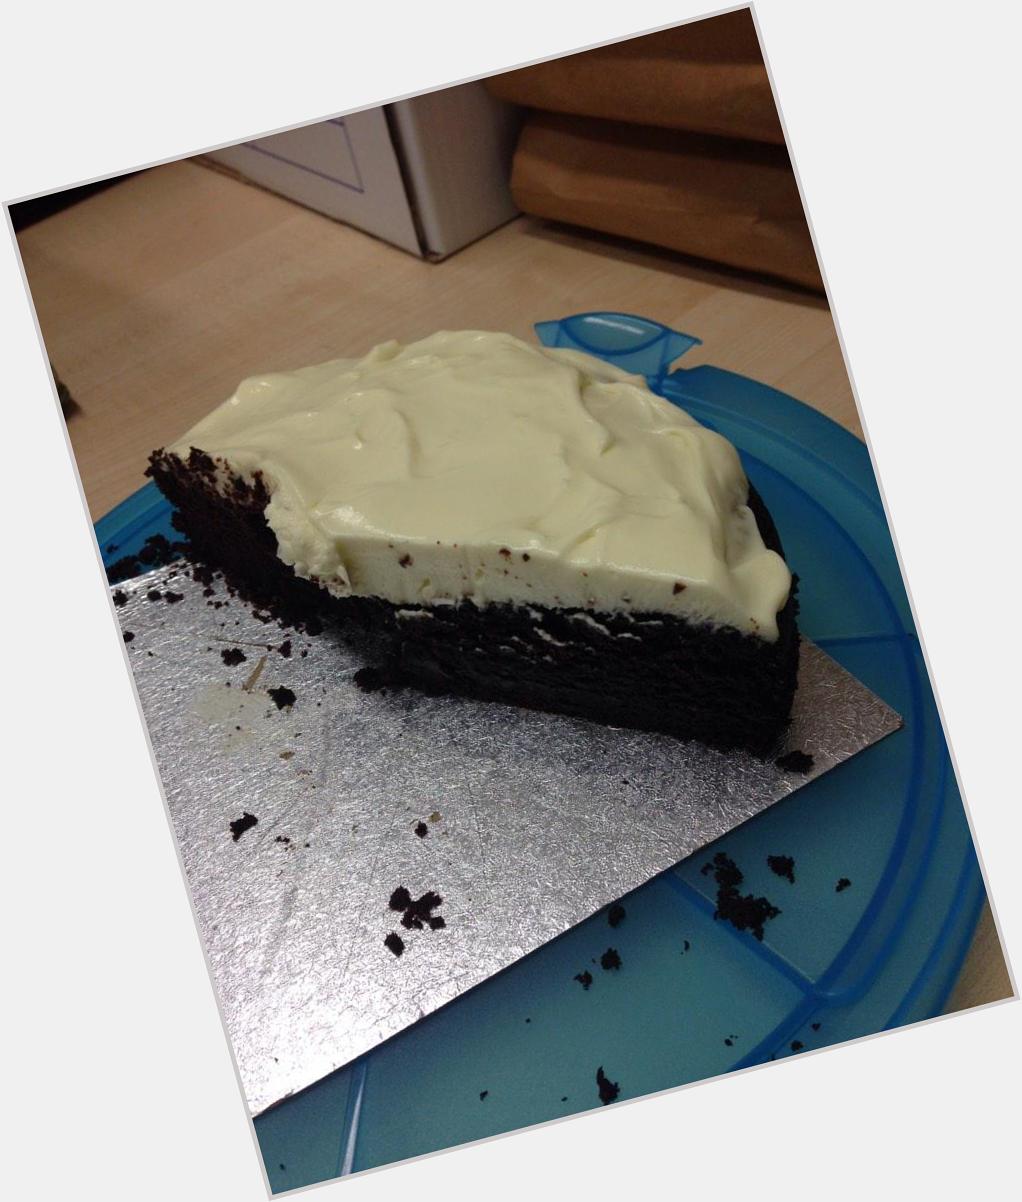  Happy birthday to !! An amazing Guinness cake today to help celebrate 